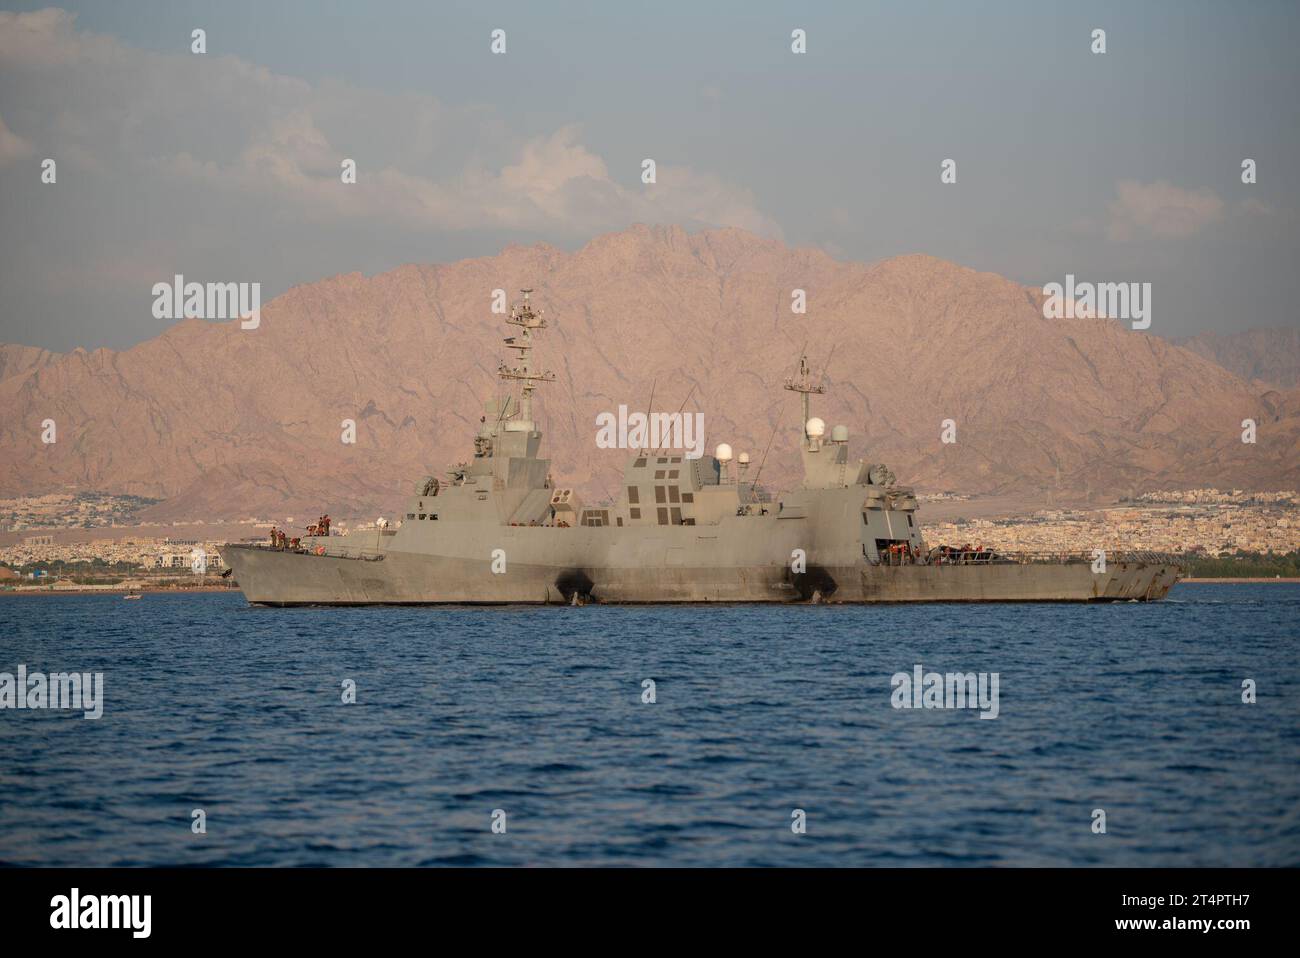 (231101) -- JERUSALEM, Nov. 1, 2023 (Xinhua) -- An Israeli Navy missile boat is seen in the area of the Red Sea on Nov. 1, 2023. Israel sent missile boats to the Red Sea, the army said on Wednesday after Houthi forces in Yemen fired missiles and drones toward Israel's resort city of Eilat. 'Israeli Navy missile boats arrived in the area of the Red Sea,' the Israel Defense Forces (IDF) said in a statement, noting the move was made following a 'situational assessment and as part of defensive efforts in the area.' (IDF/Handout via Xinhua) Stock Photo